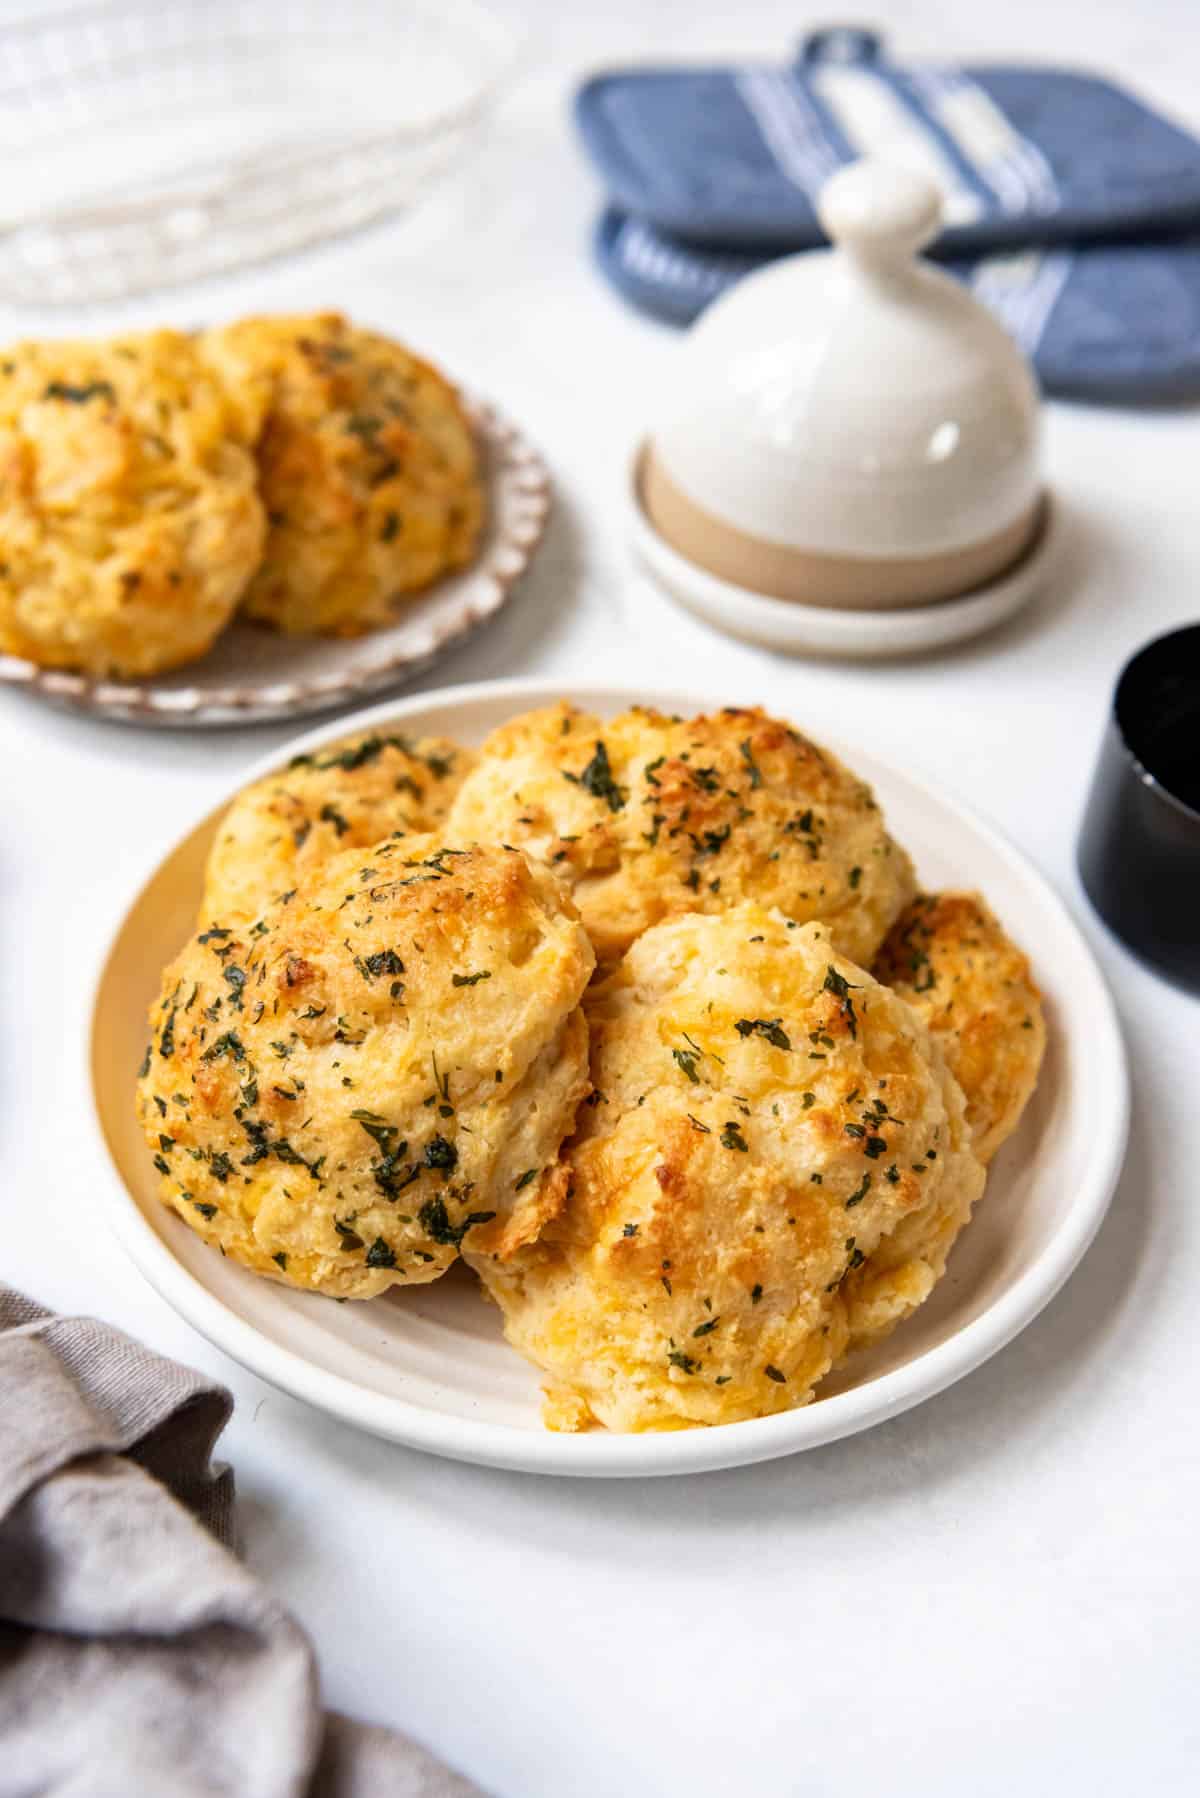 An image of plates of cheddar bay biscuits in front of a butter dish and blue hot pads.